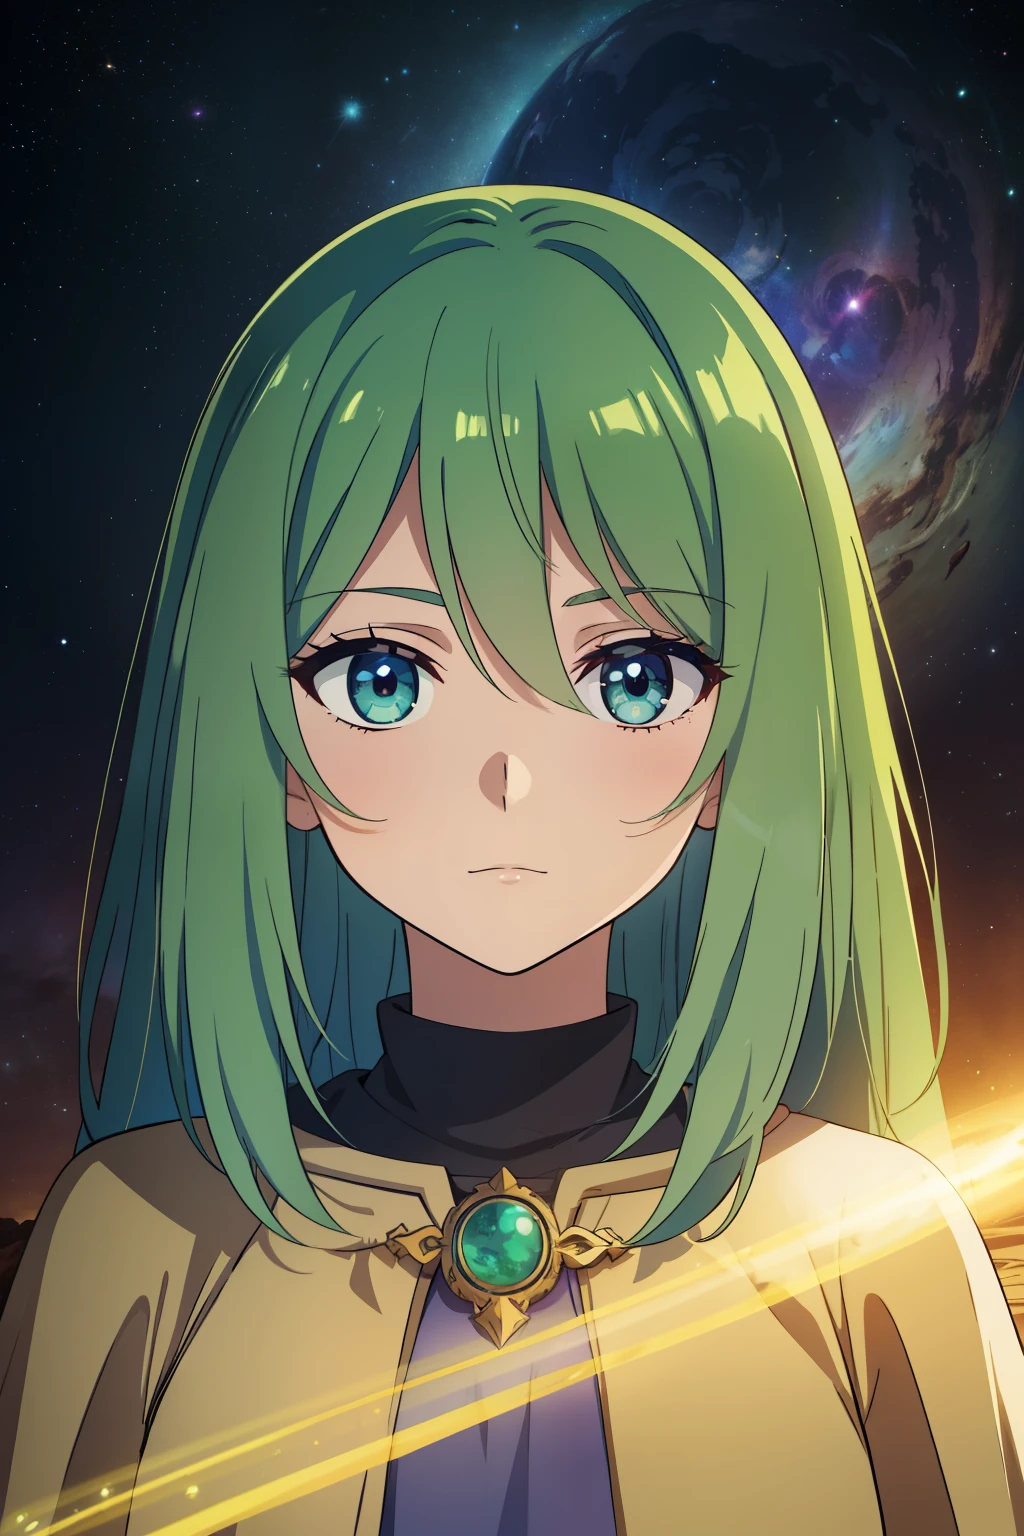 (high-quality, breathtaking),(expressive eyes, perfect face) 1female, female, solo, short height, young teenager age, long length hair, blue and green hair color, multi-coloured hair, unkept hair, earthy colored eyes, kind expression, warm soft smile, cloak, shirt, fantasy mage clothing, adventurers attire, Earth planet, Tellus Mater Roman God of the Earth, space background, portrait, upper body, magic, stylized hair